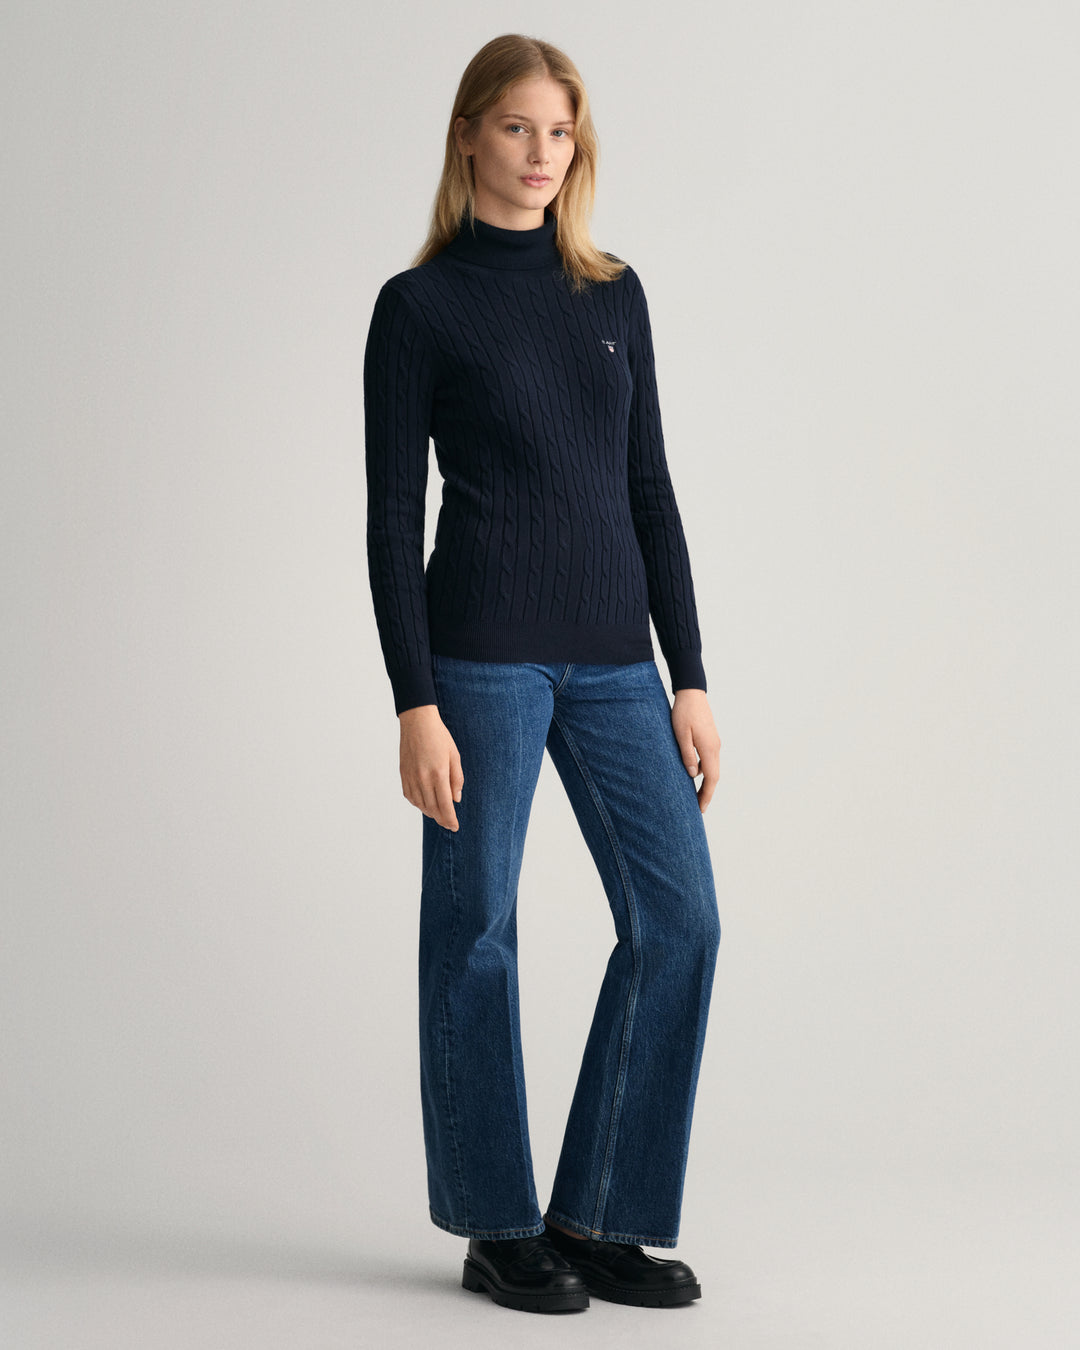 GANT Stretch Cotton Cable Turtle Neck/Pulover 4800059